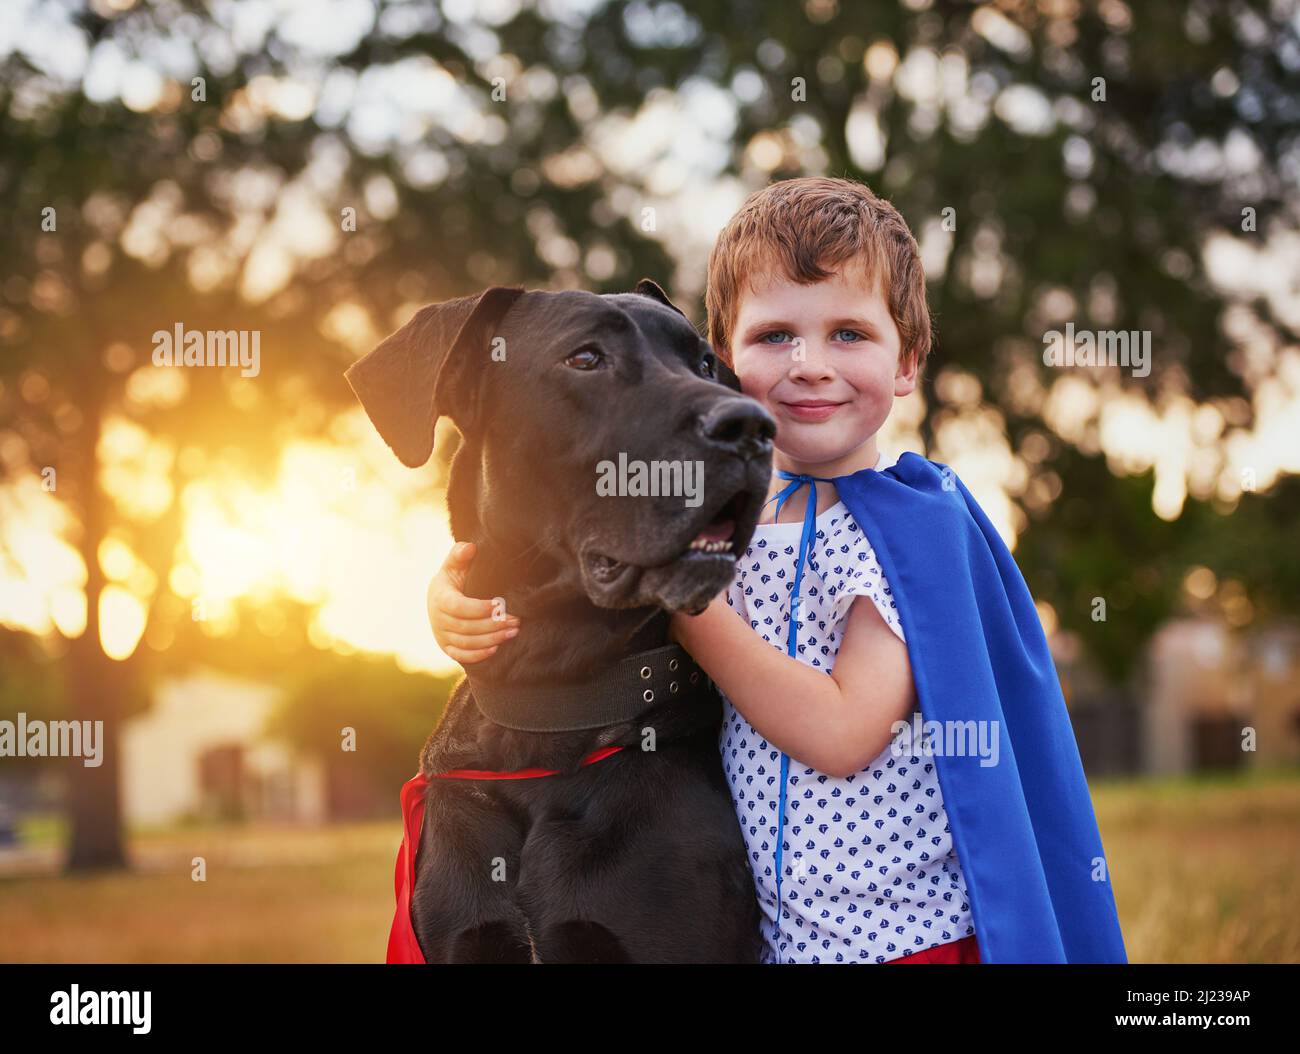 Real heroes never stand alone. Shot of a little boy and his dog wearing capes while playing outside. Stock Photo